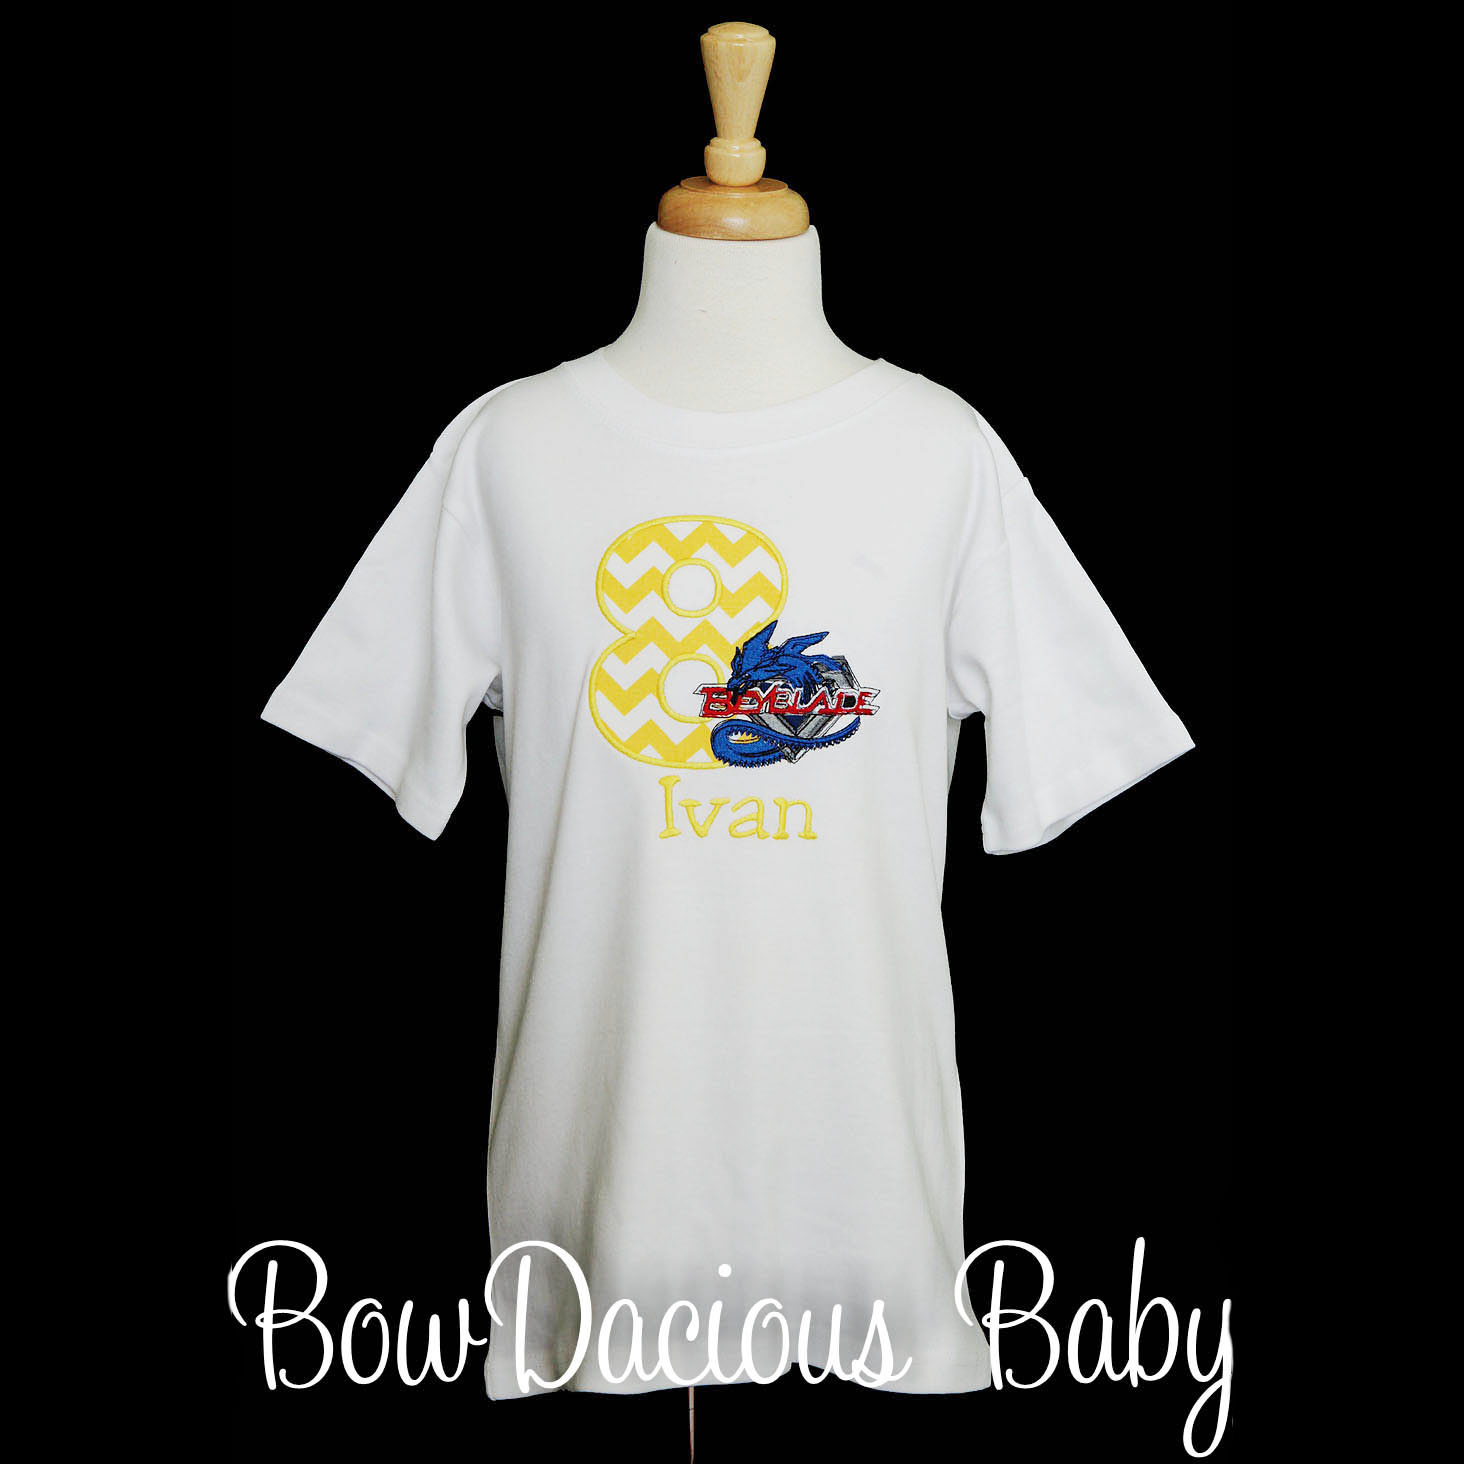 Personalized Beyblade Birthday Shirt, Custom, Any Age, Color Colors